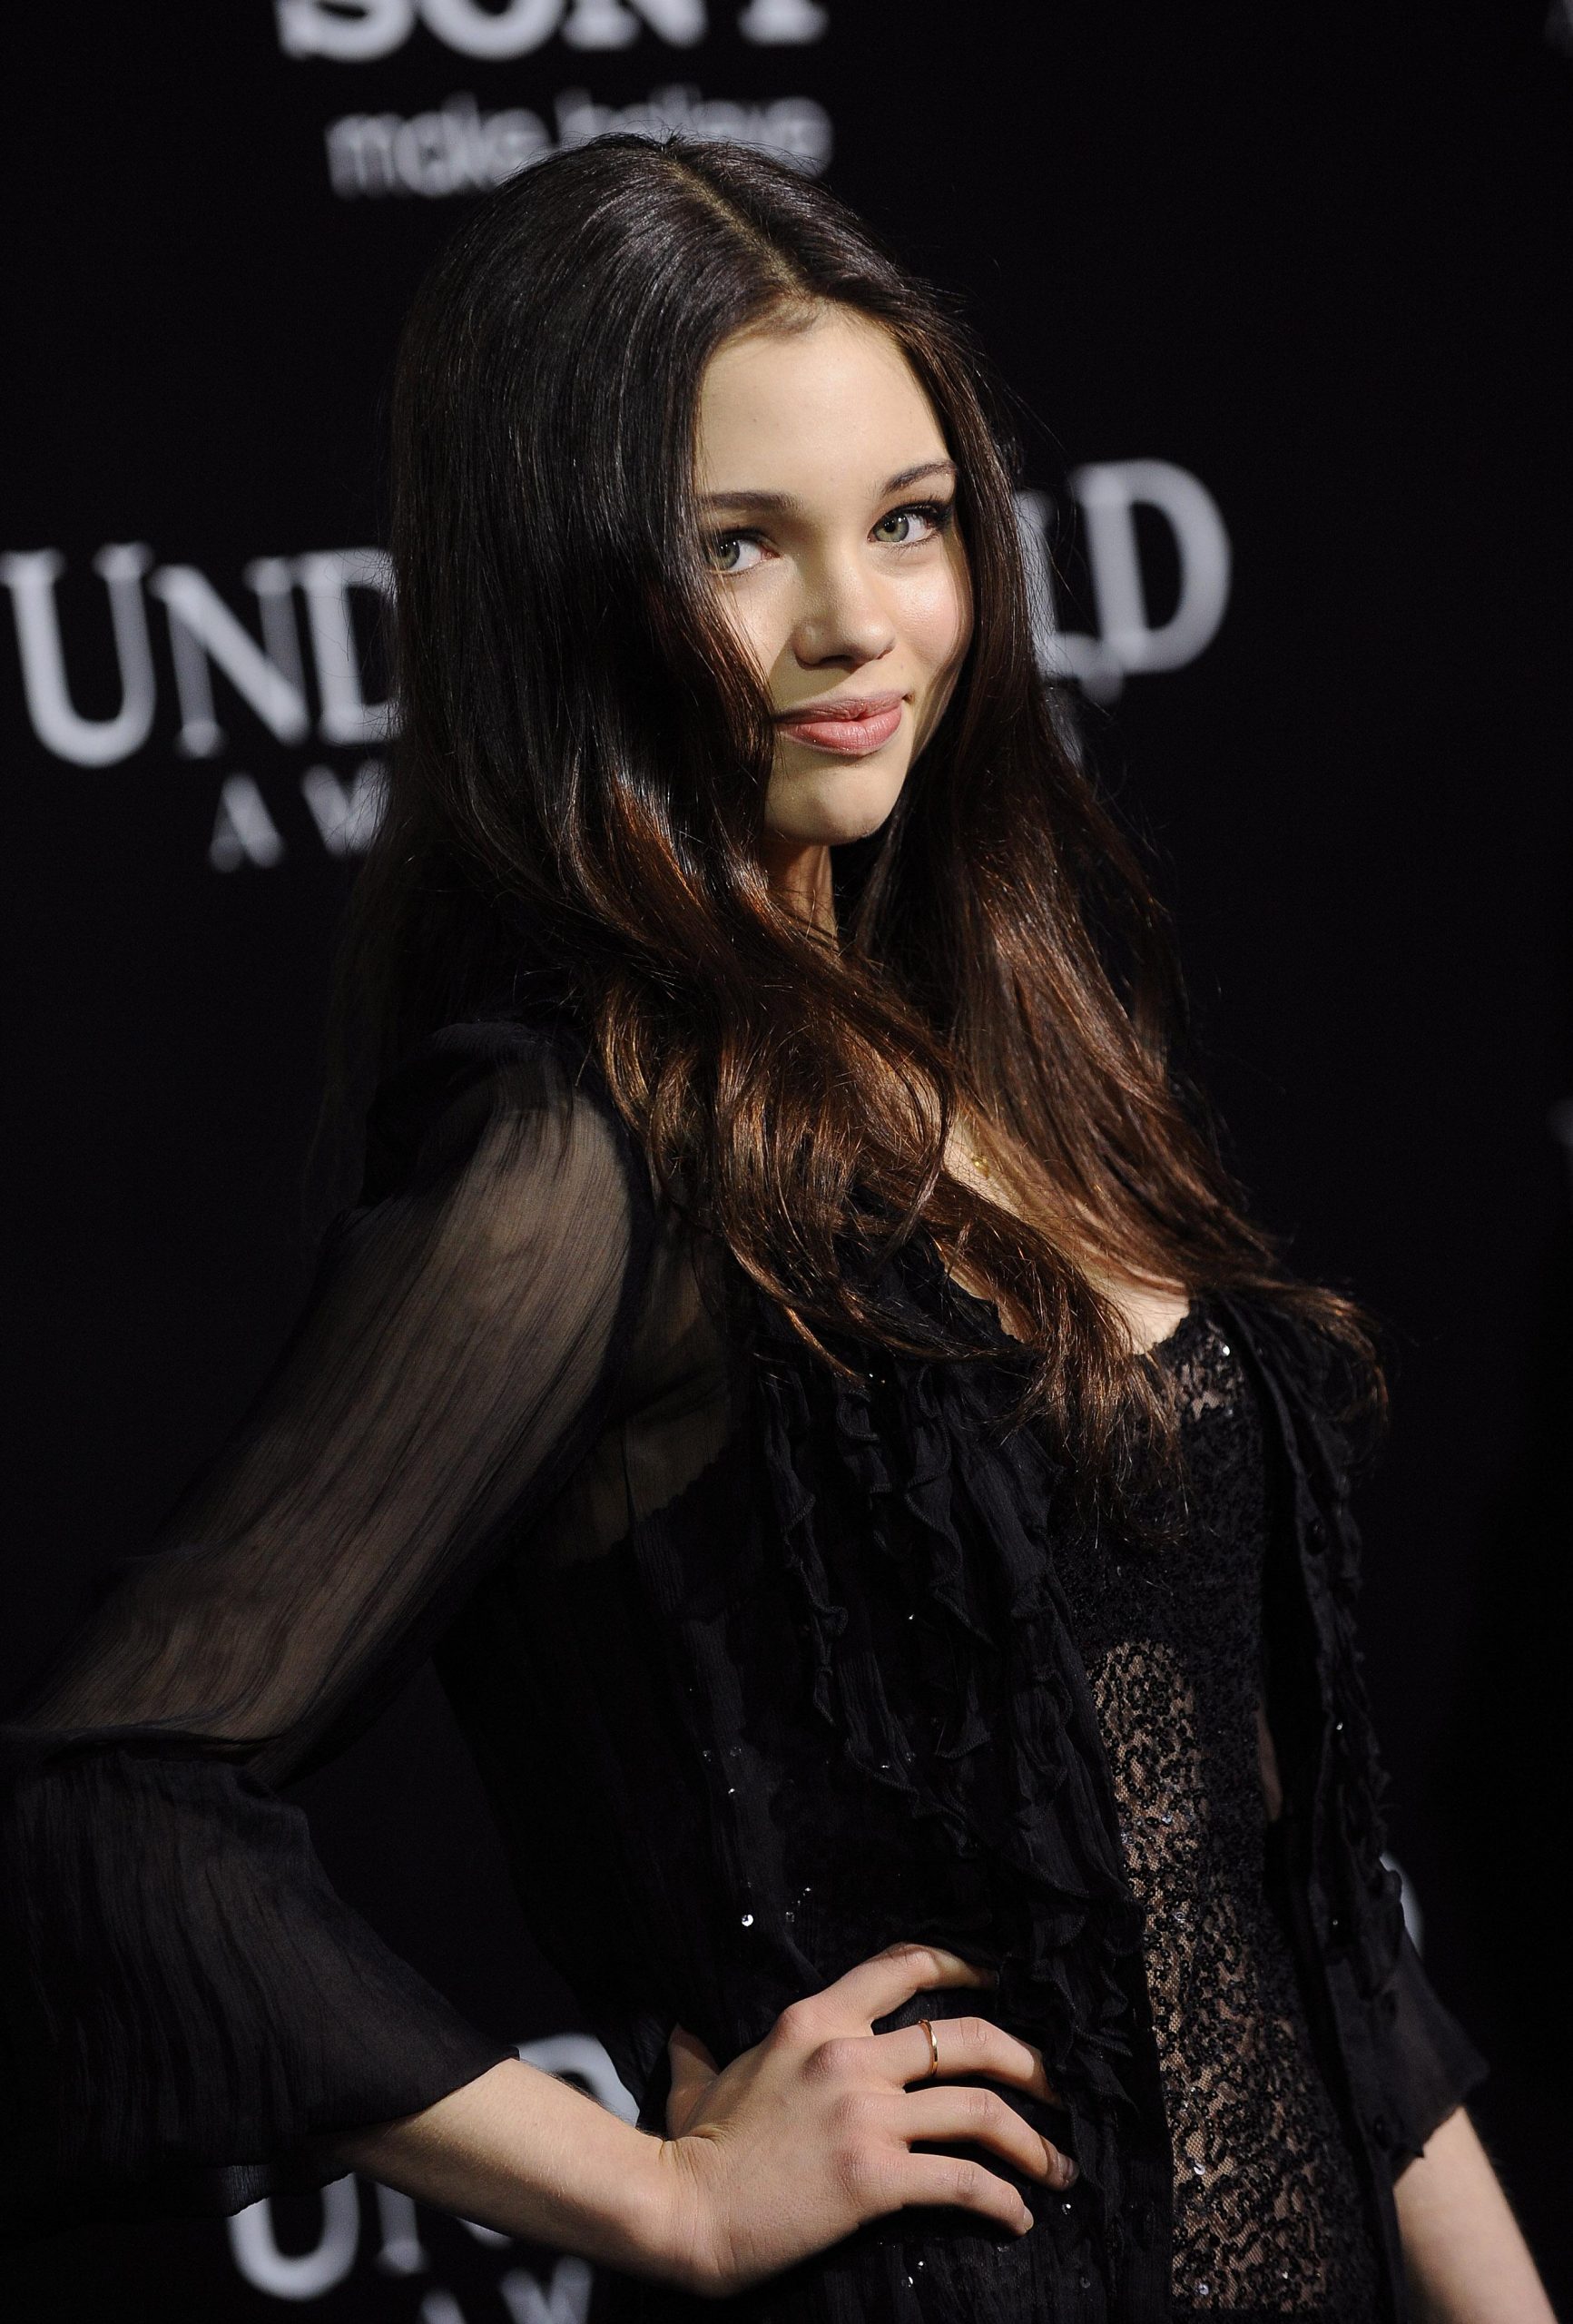 49 India Eisley Nude Pictures Can Make You Submit To Her Glitzy Looks 11